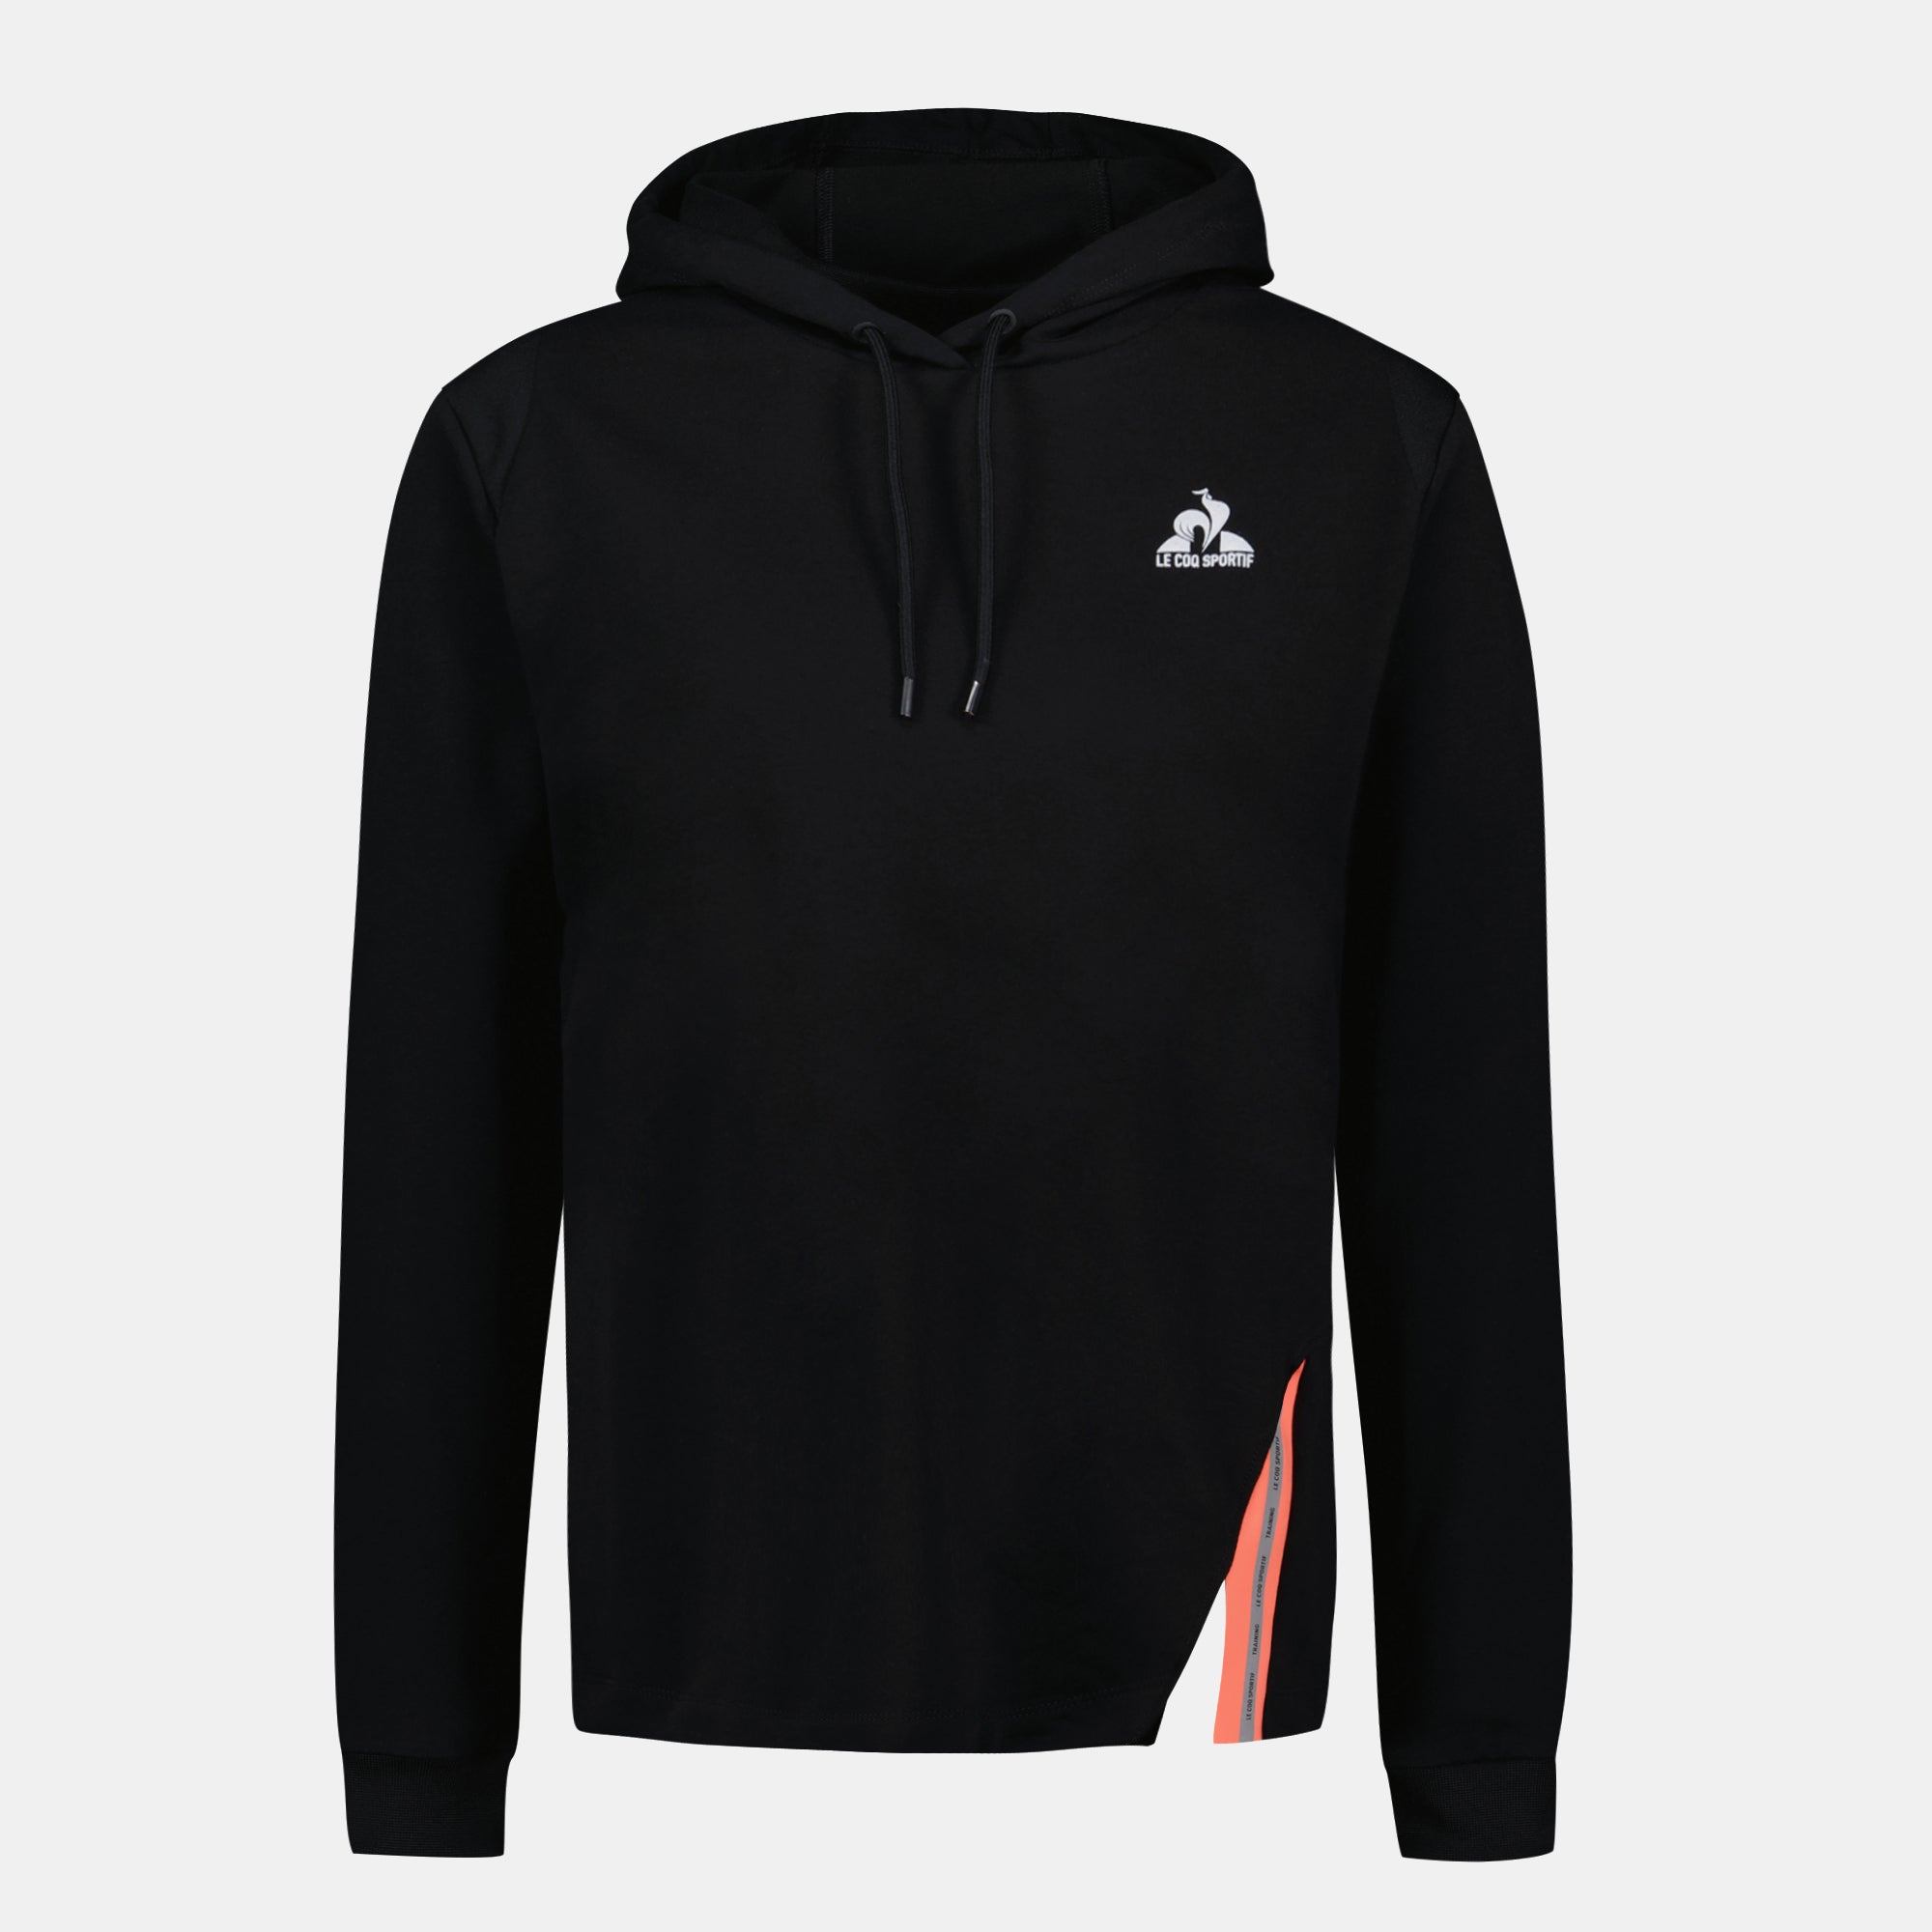 Training performance collection – Le Coq Sportif